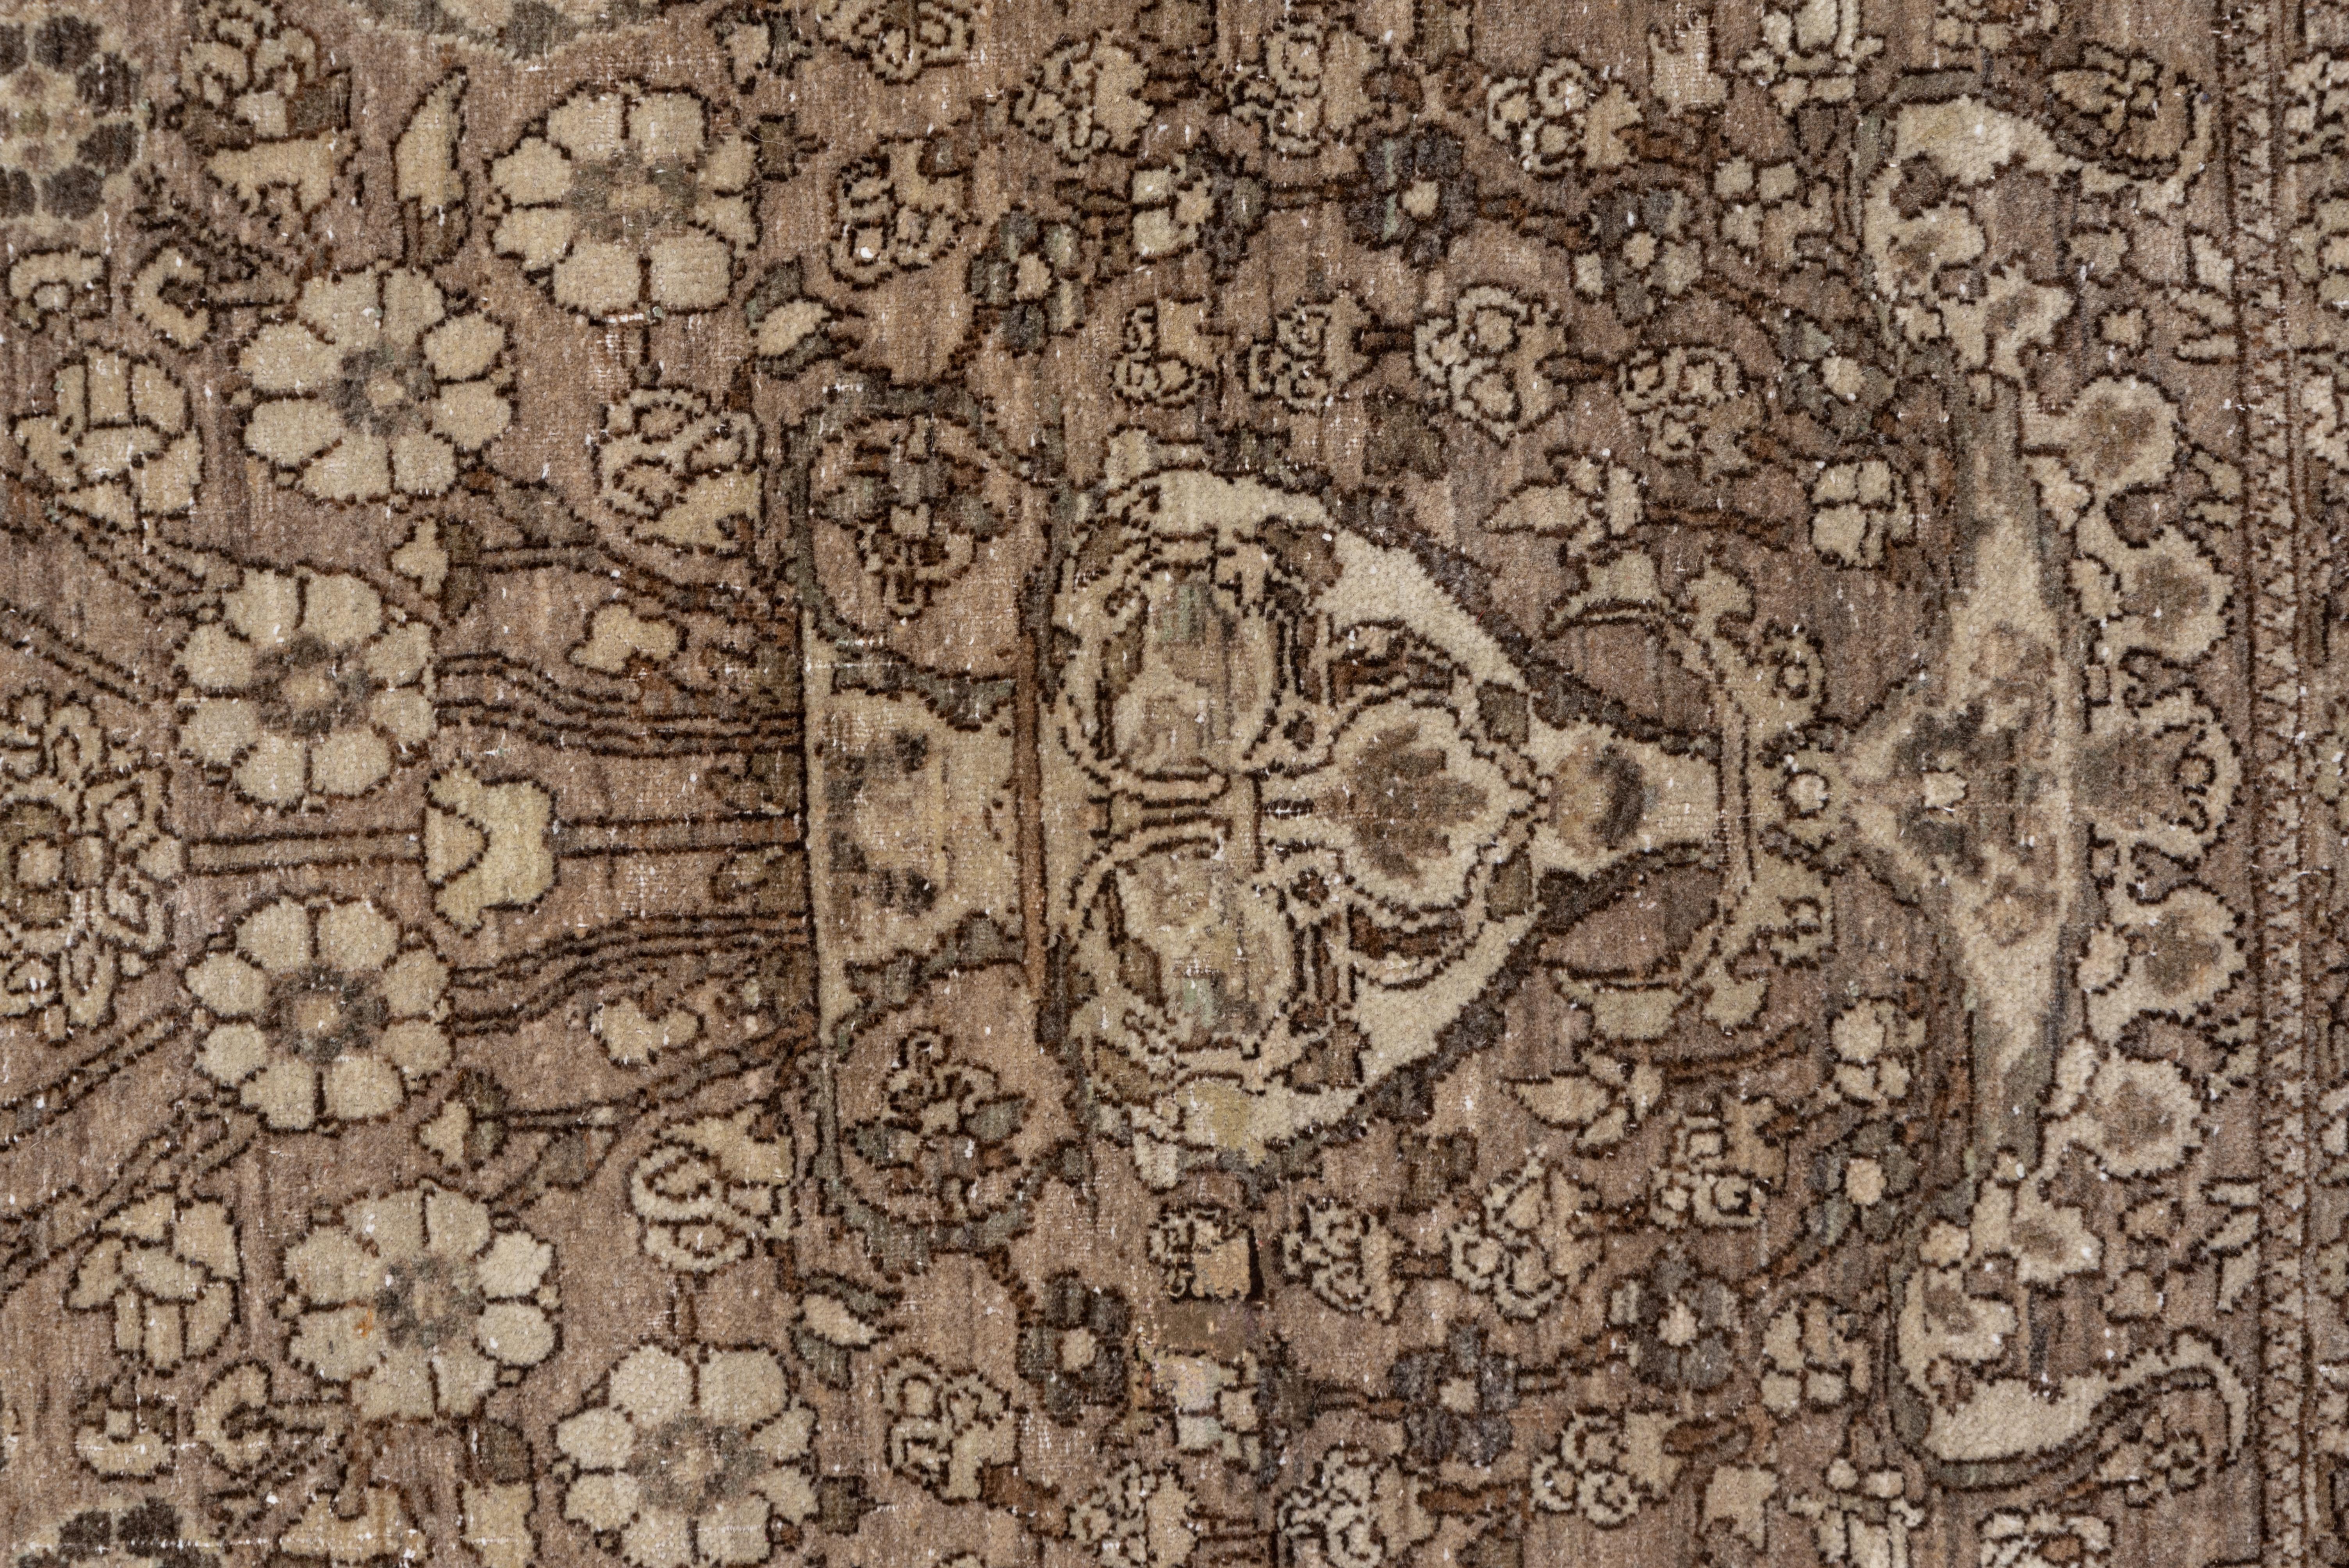 Hand-Knotted Tone on Tone Antique Brown Persian Isfahan Rug, Allover Floral Field, circa 1920